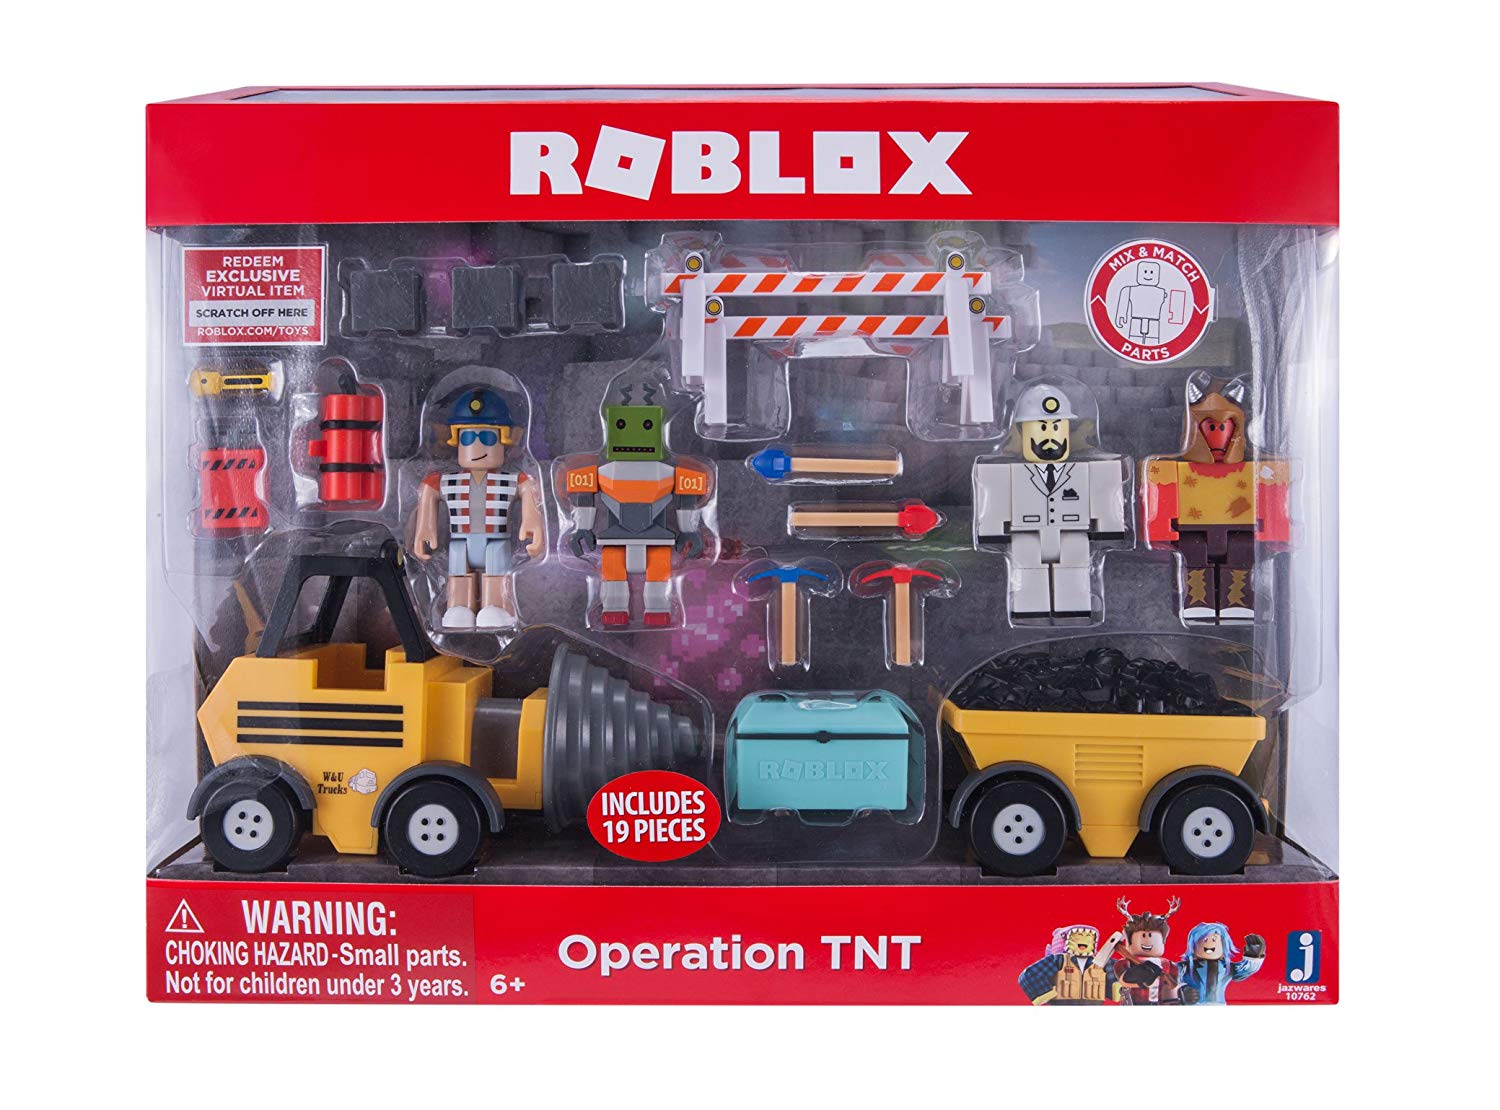 15 Best Roblox Toys The Ultimate List 2021 Heavy Com - roblox vehicle toys